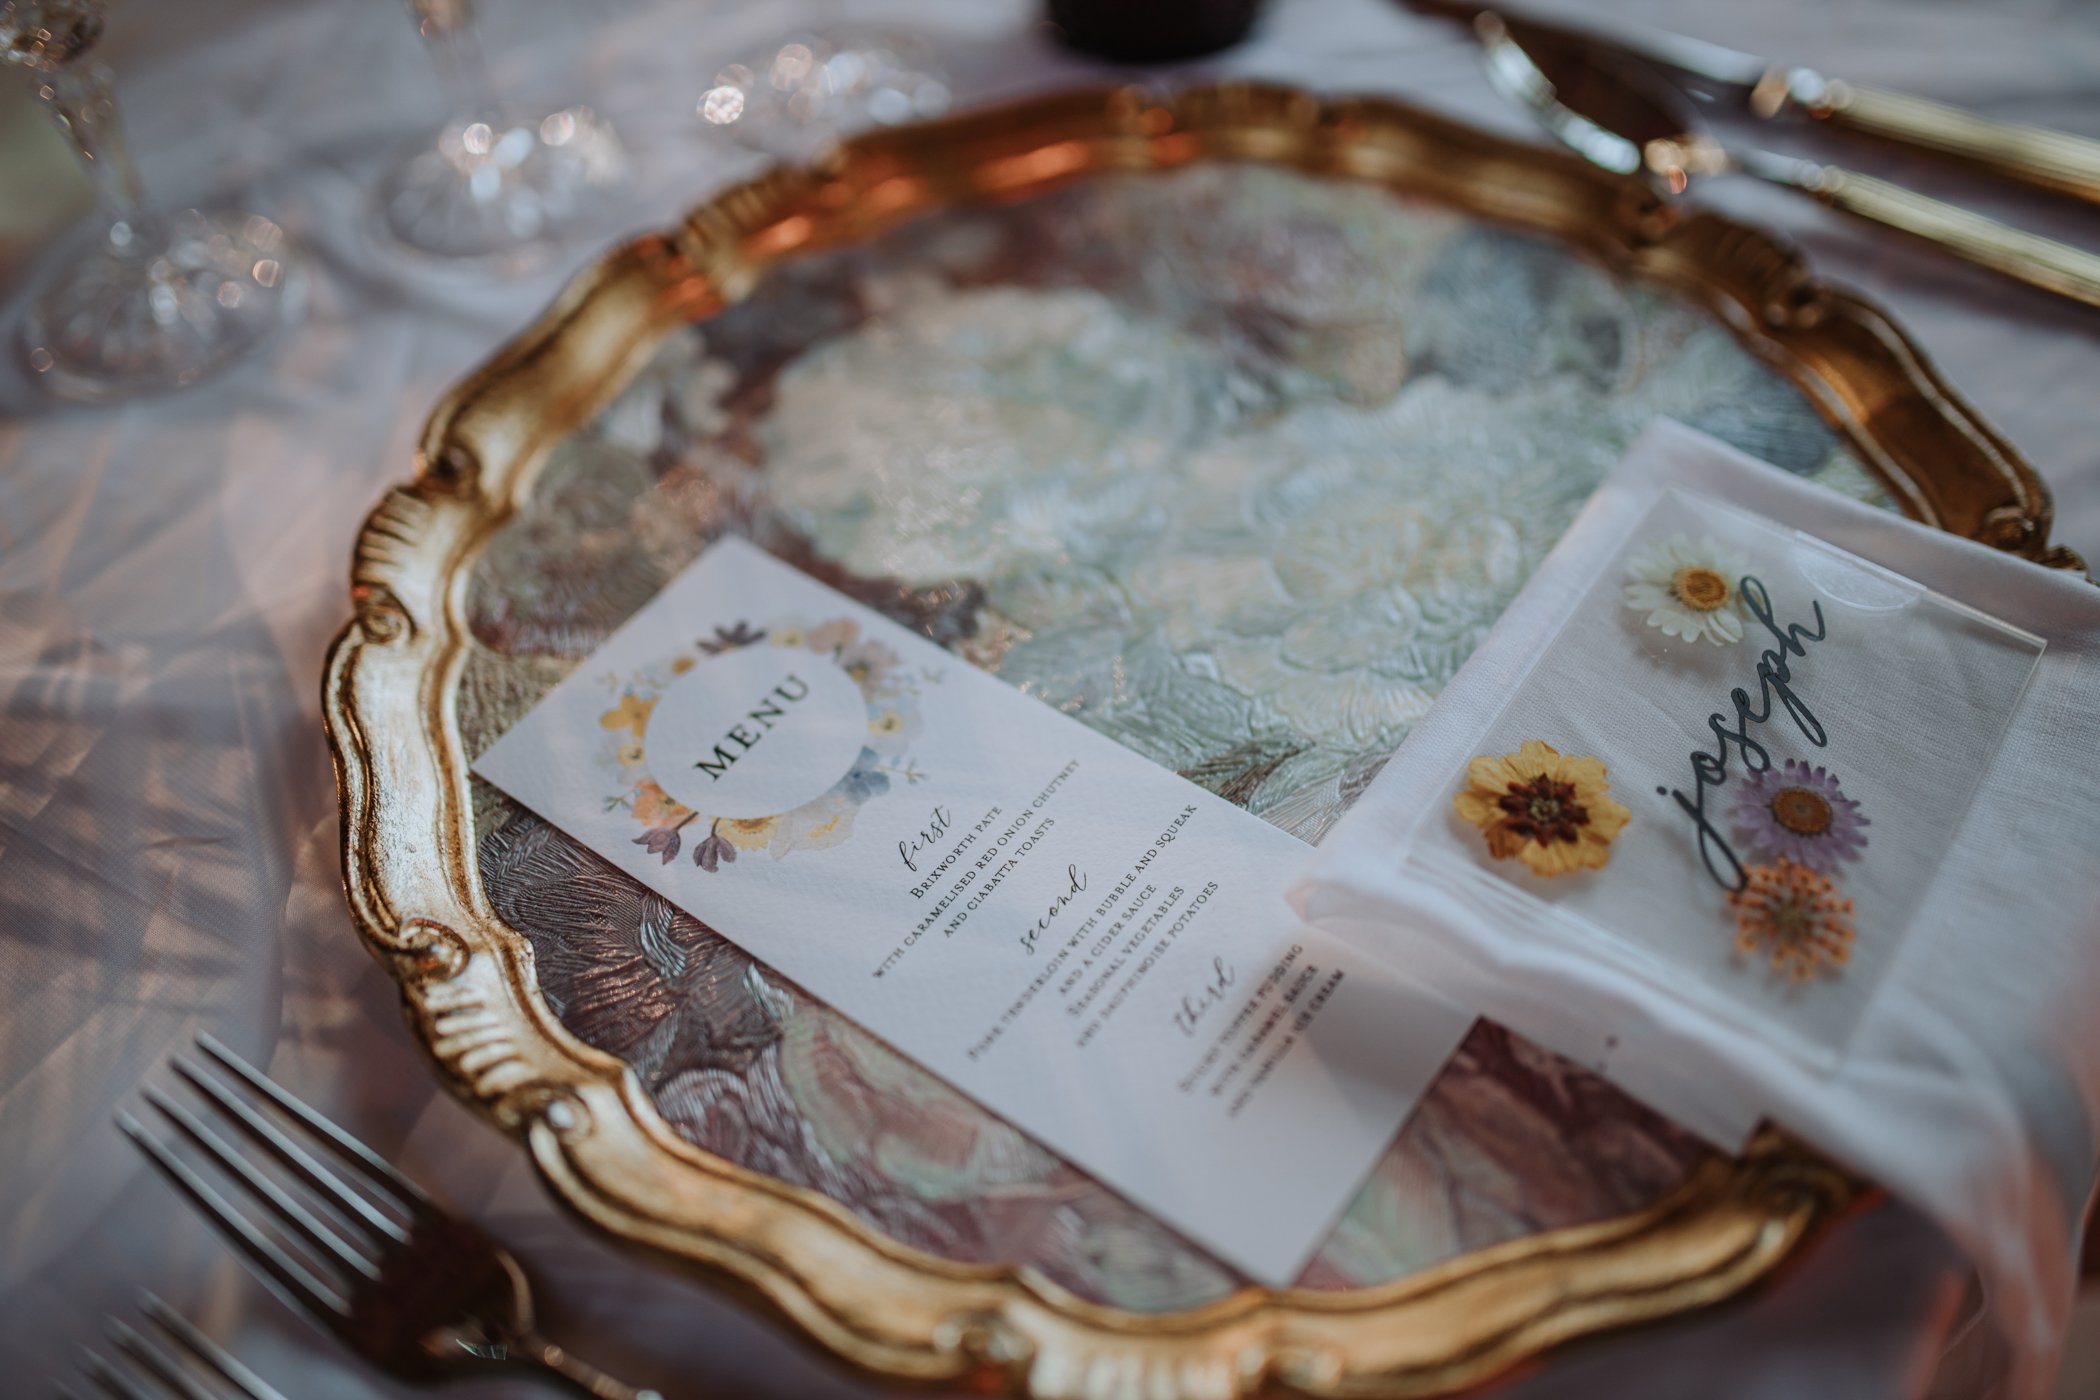 Floral wedding breakfast menu on floral charger plate